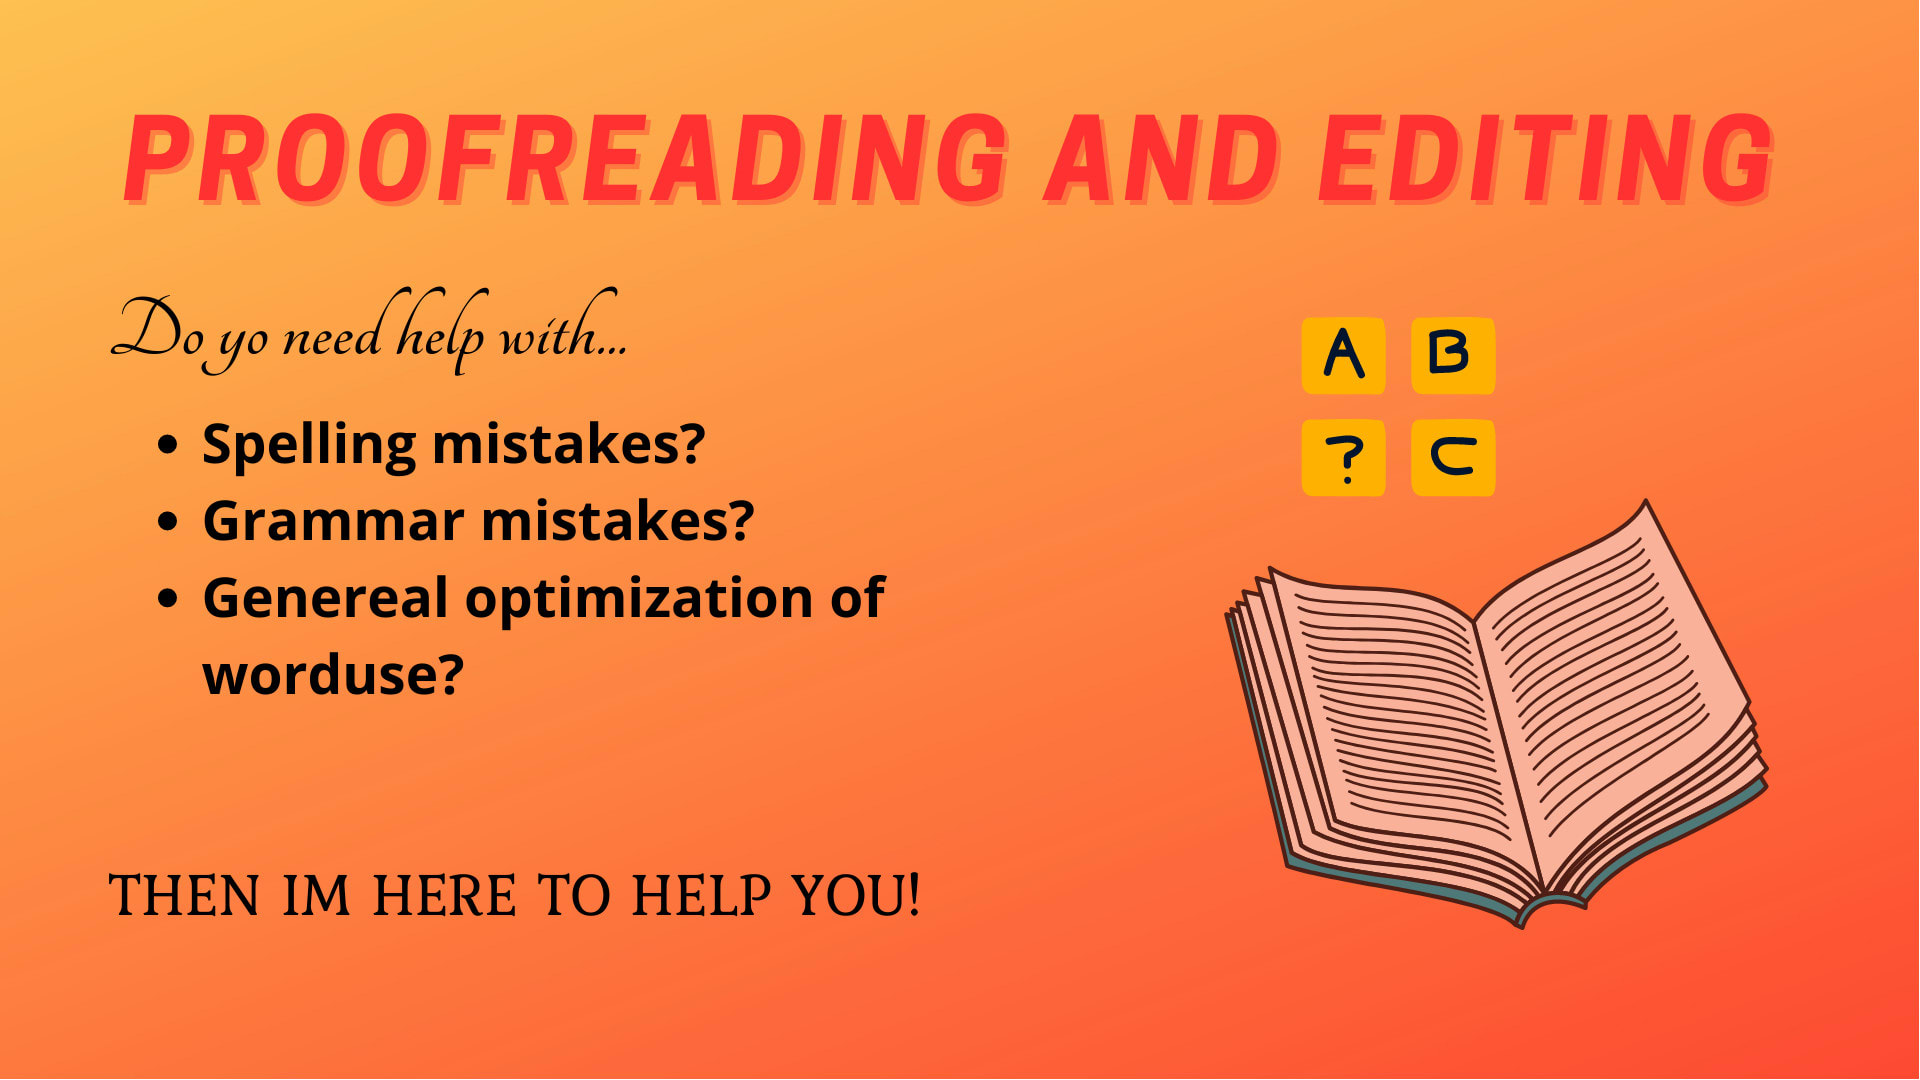 bomuld isolation nudler Happily assist you with proofreading and editing tasks by Maja_pedersen |  Fiverr